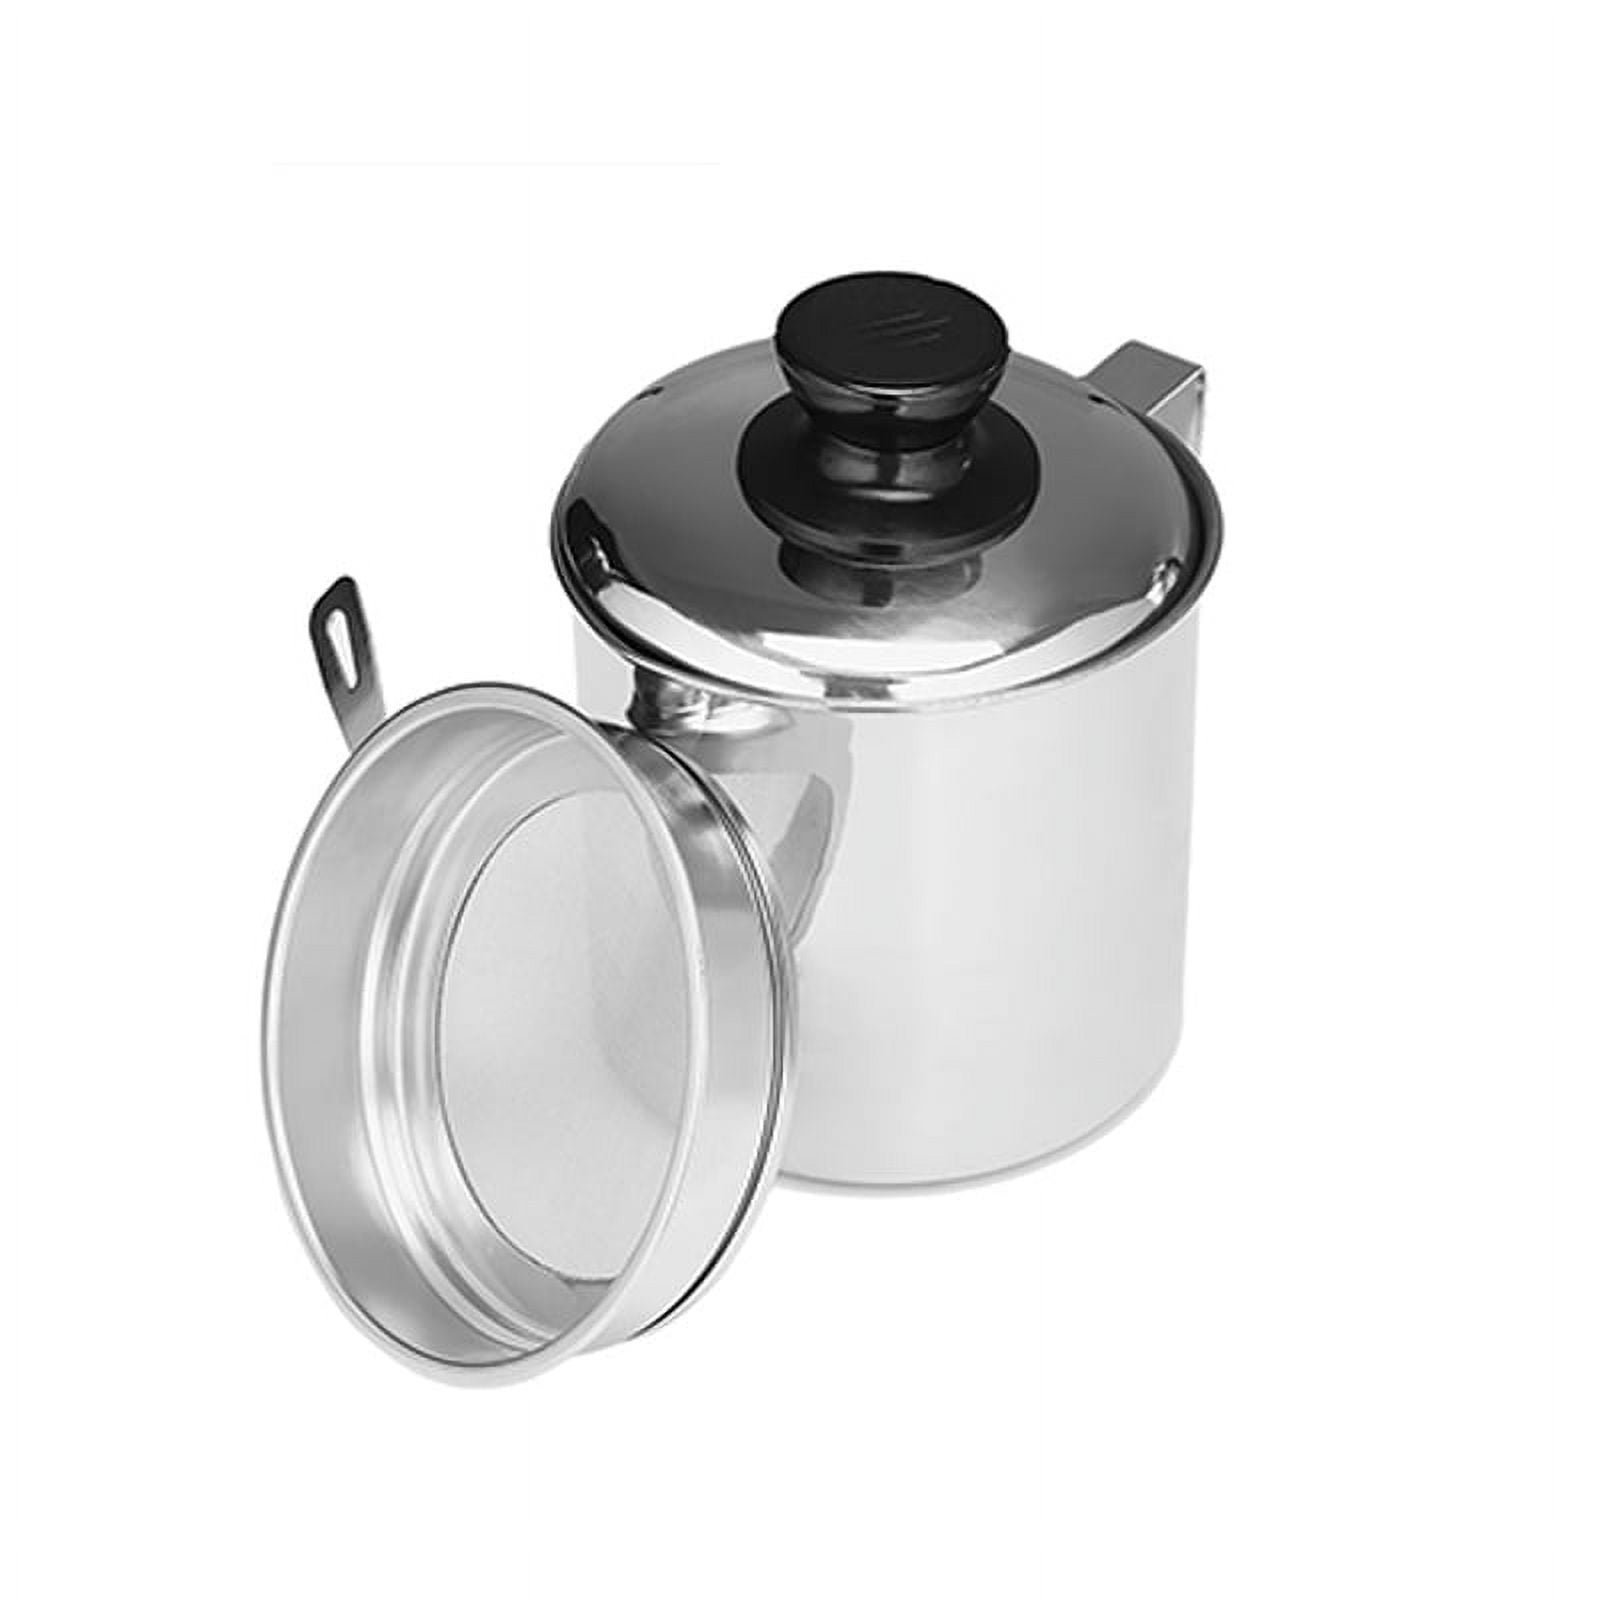 Oil Strainer Pot Grease Can 2L / 67.6 fl oz Food Strainer Stainless Steel Oil Storage Container with Fine Mesh Strainer Dust-proof Lid Non-Slip Tray F